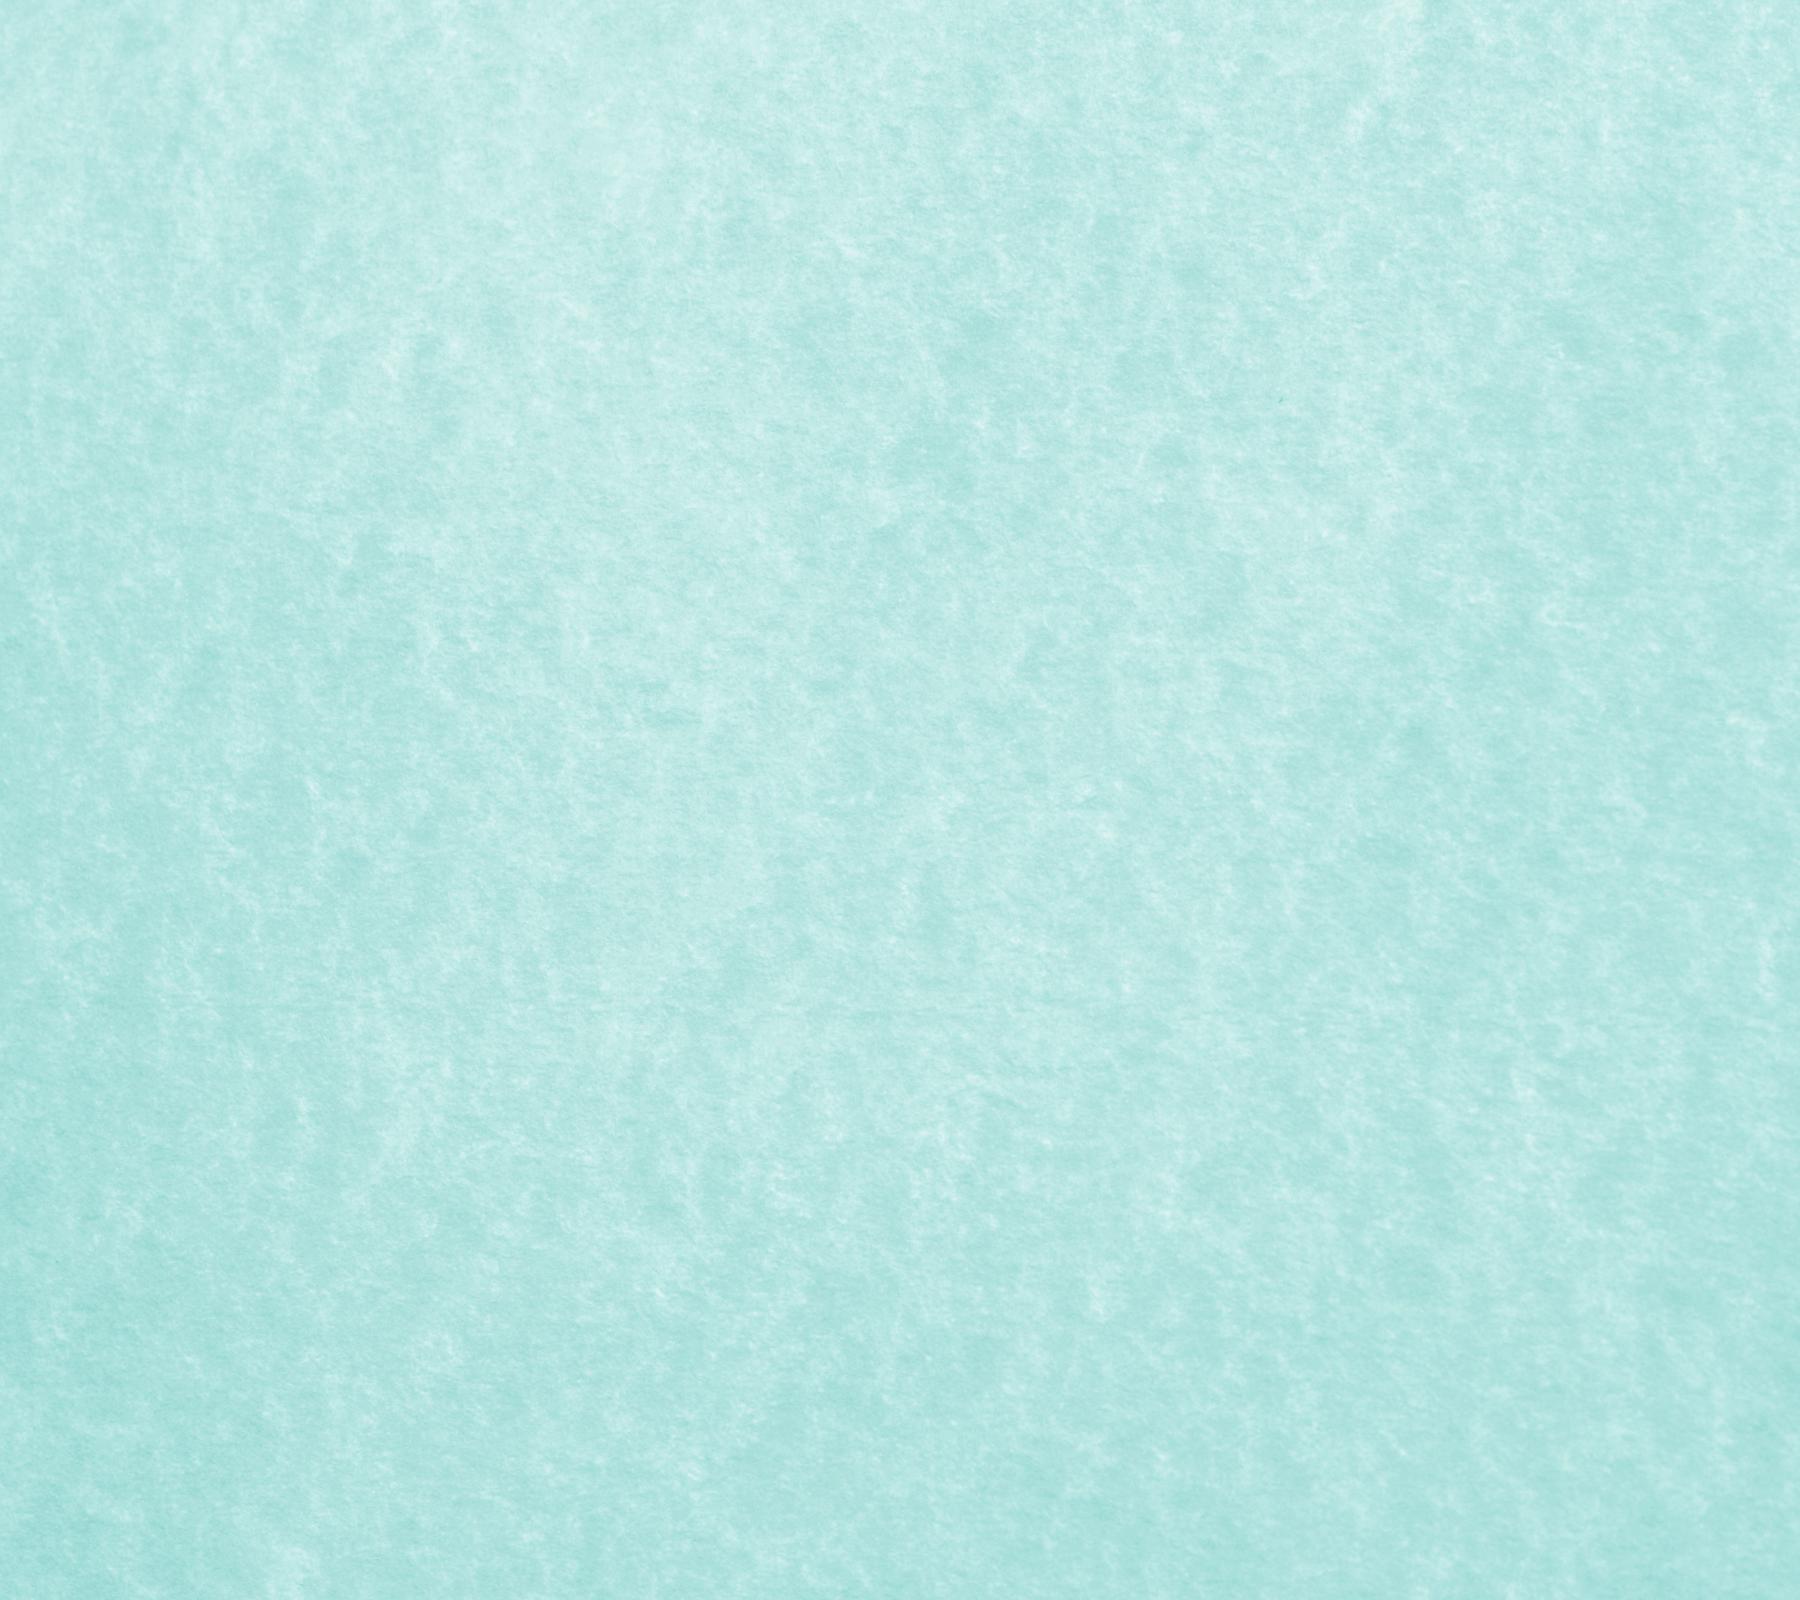 backgrounds tumblr teal Gallery  Viewing Background Aqua Blue Light